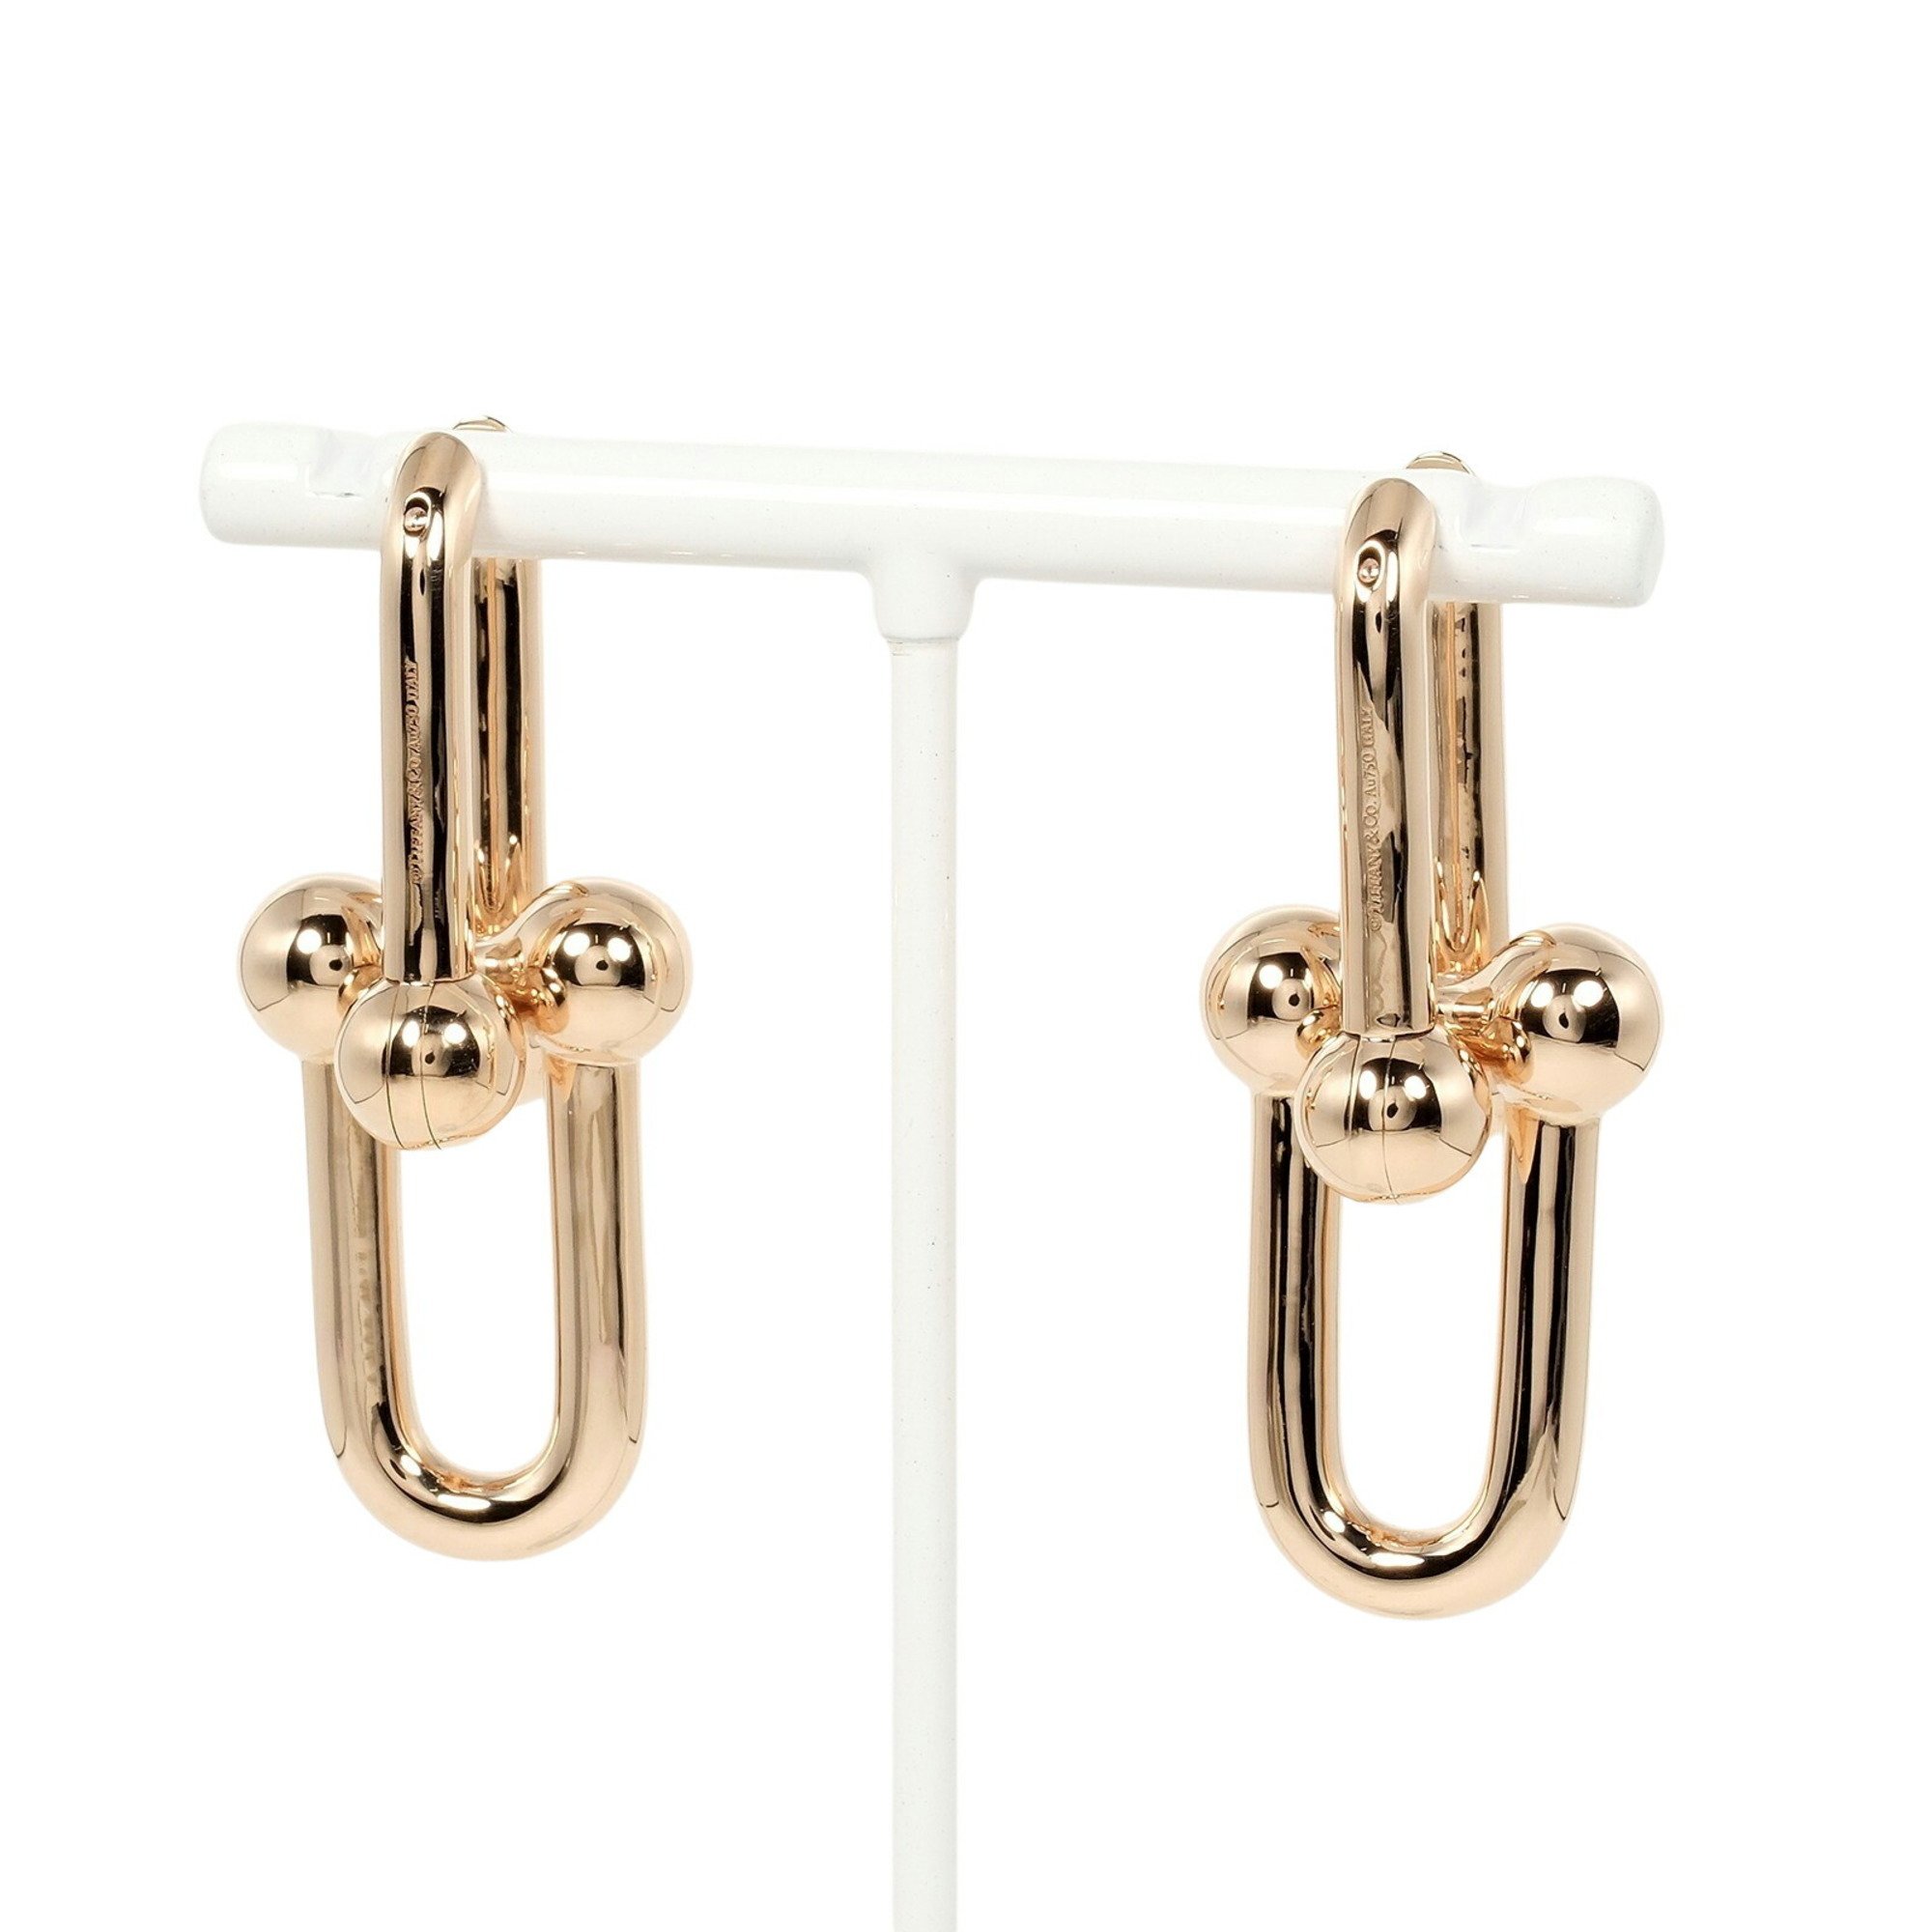 Tiffany TIFFANY&Co. Hardware Extra Large Earrings K18 PG Pink Gold Approx. 17.6g T121724524